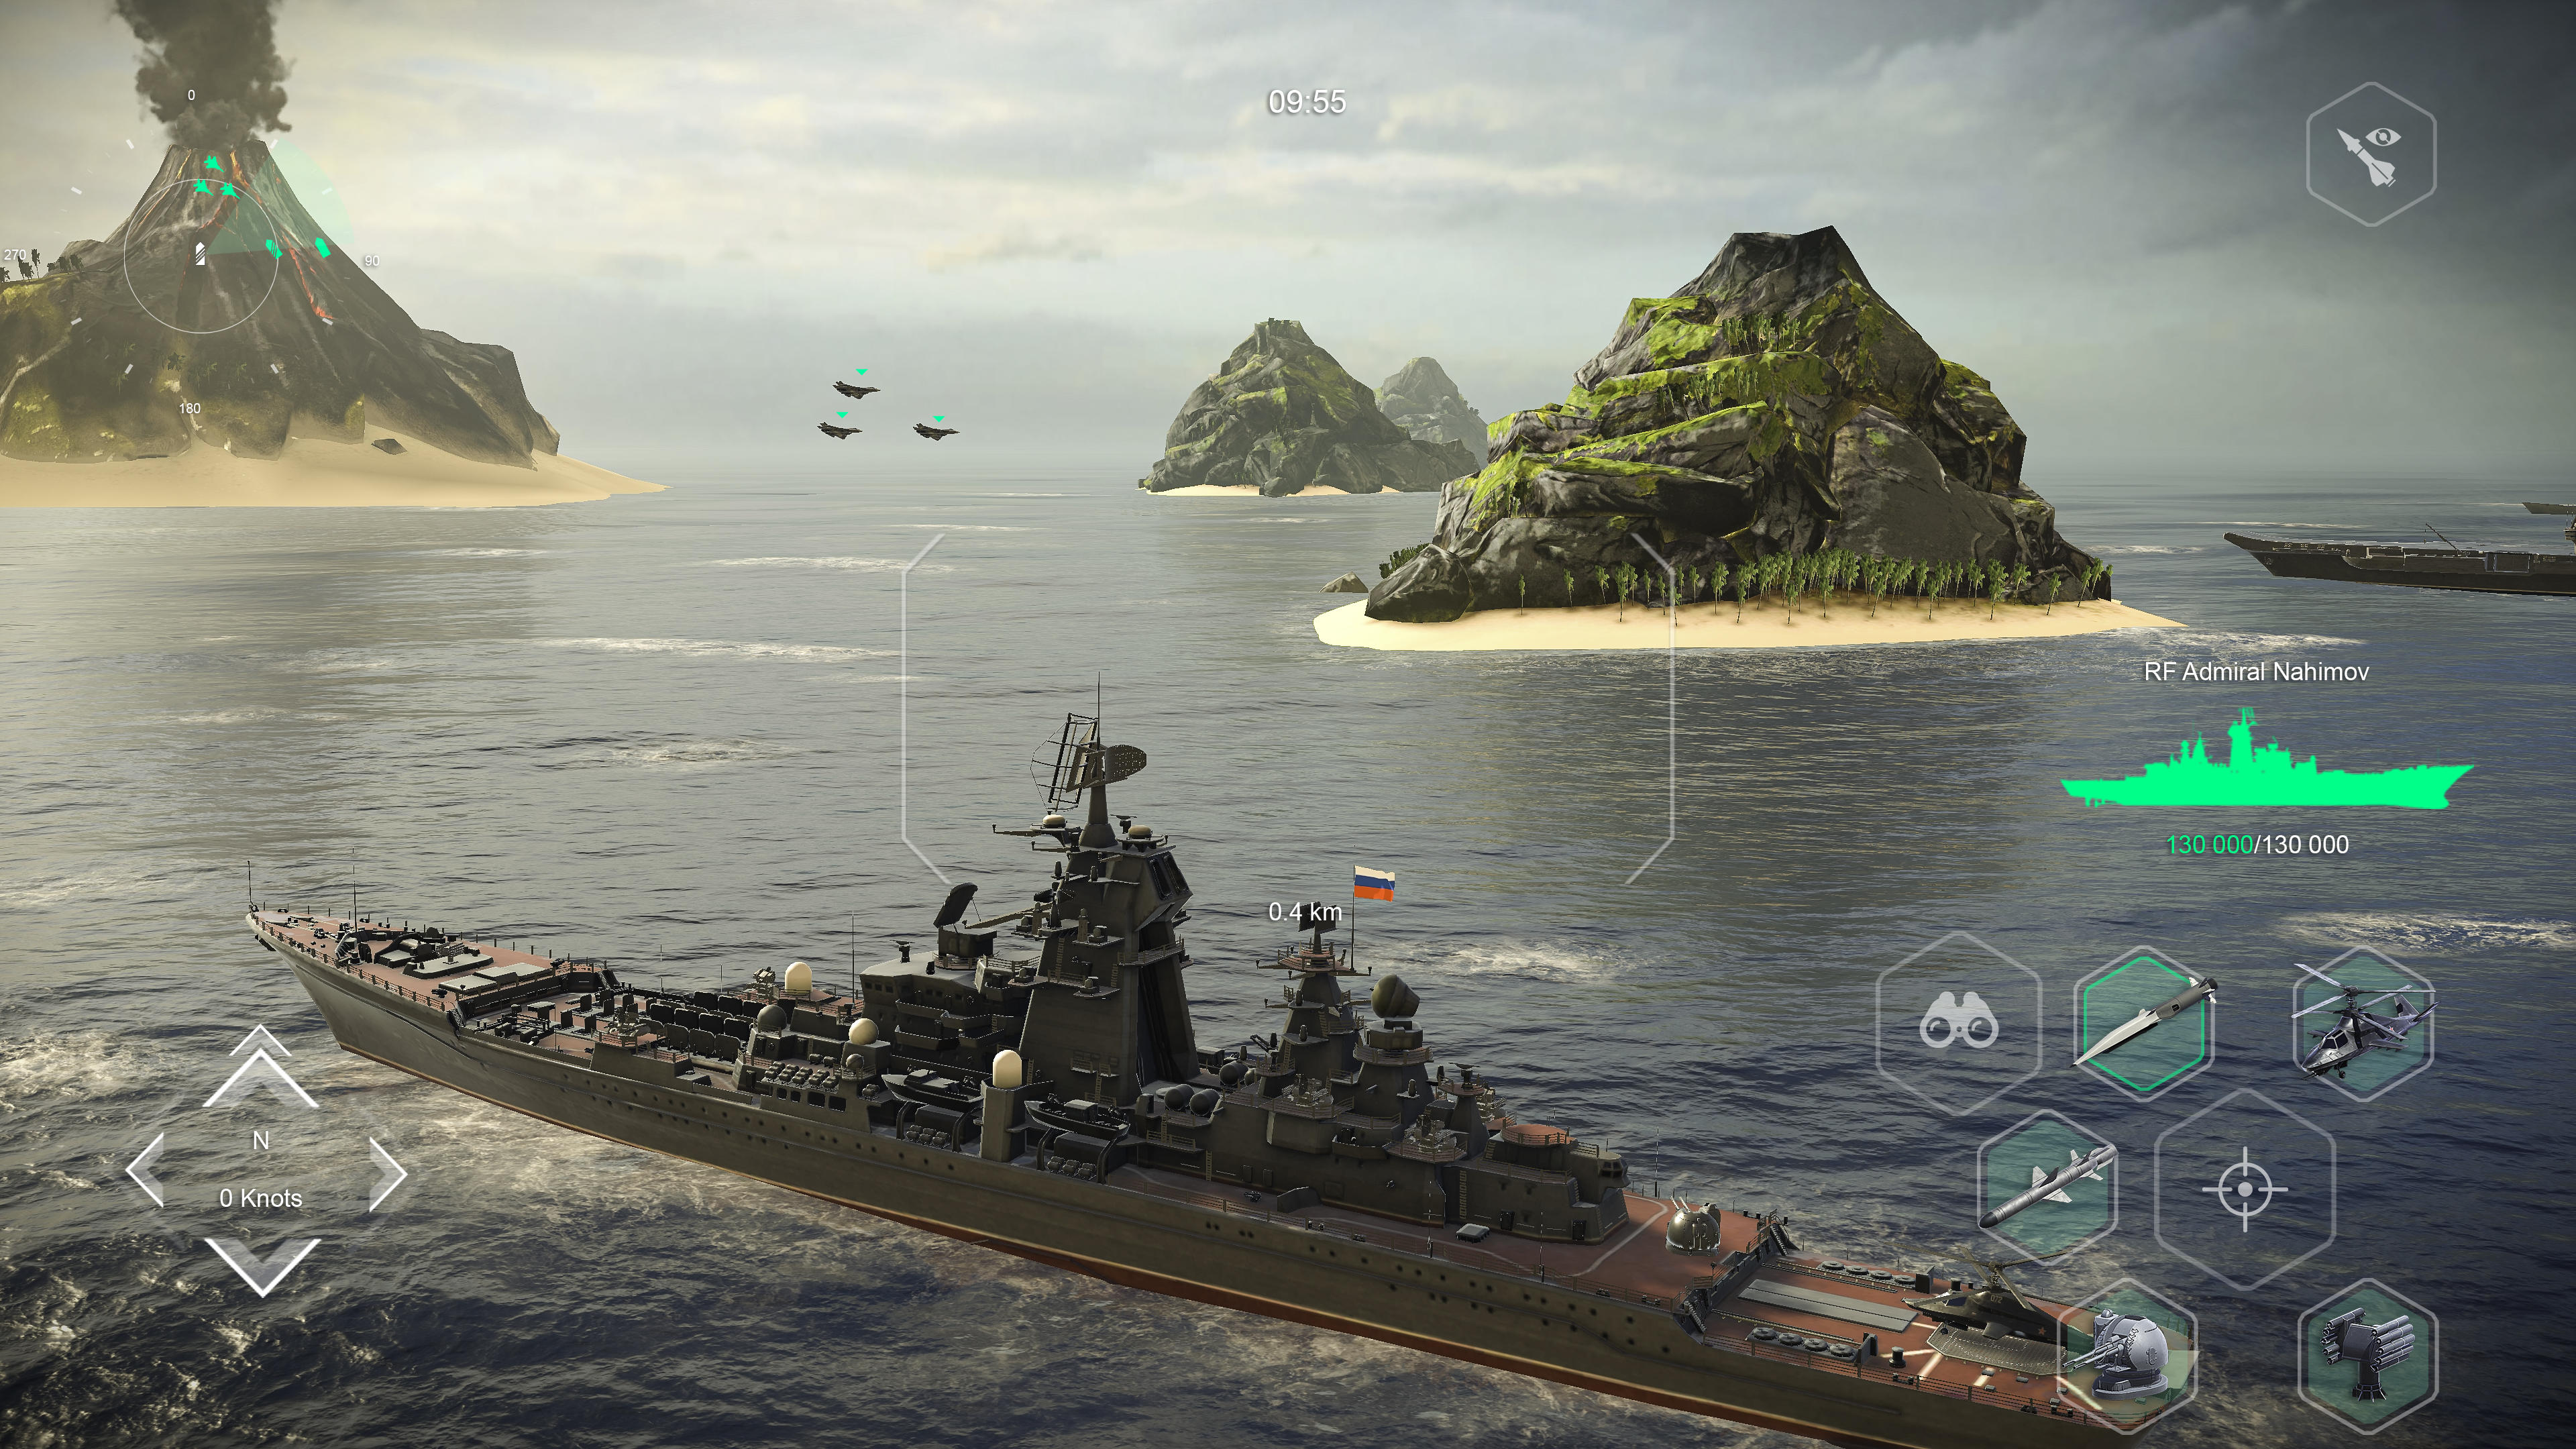 Pacific Warships download the last version for iphone